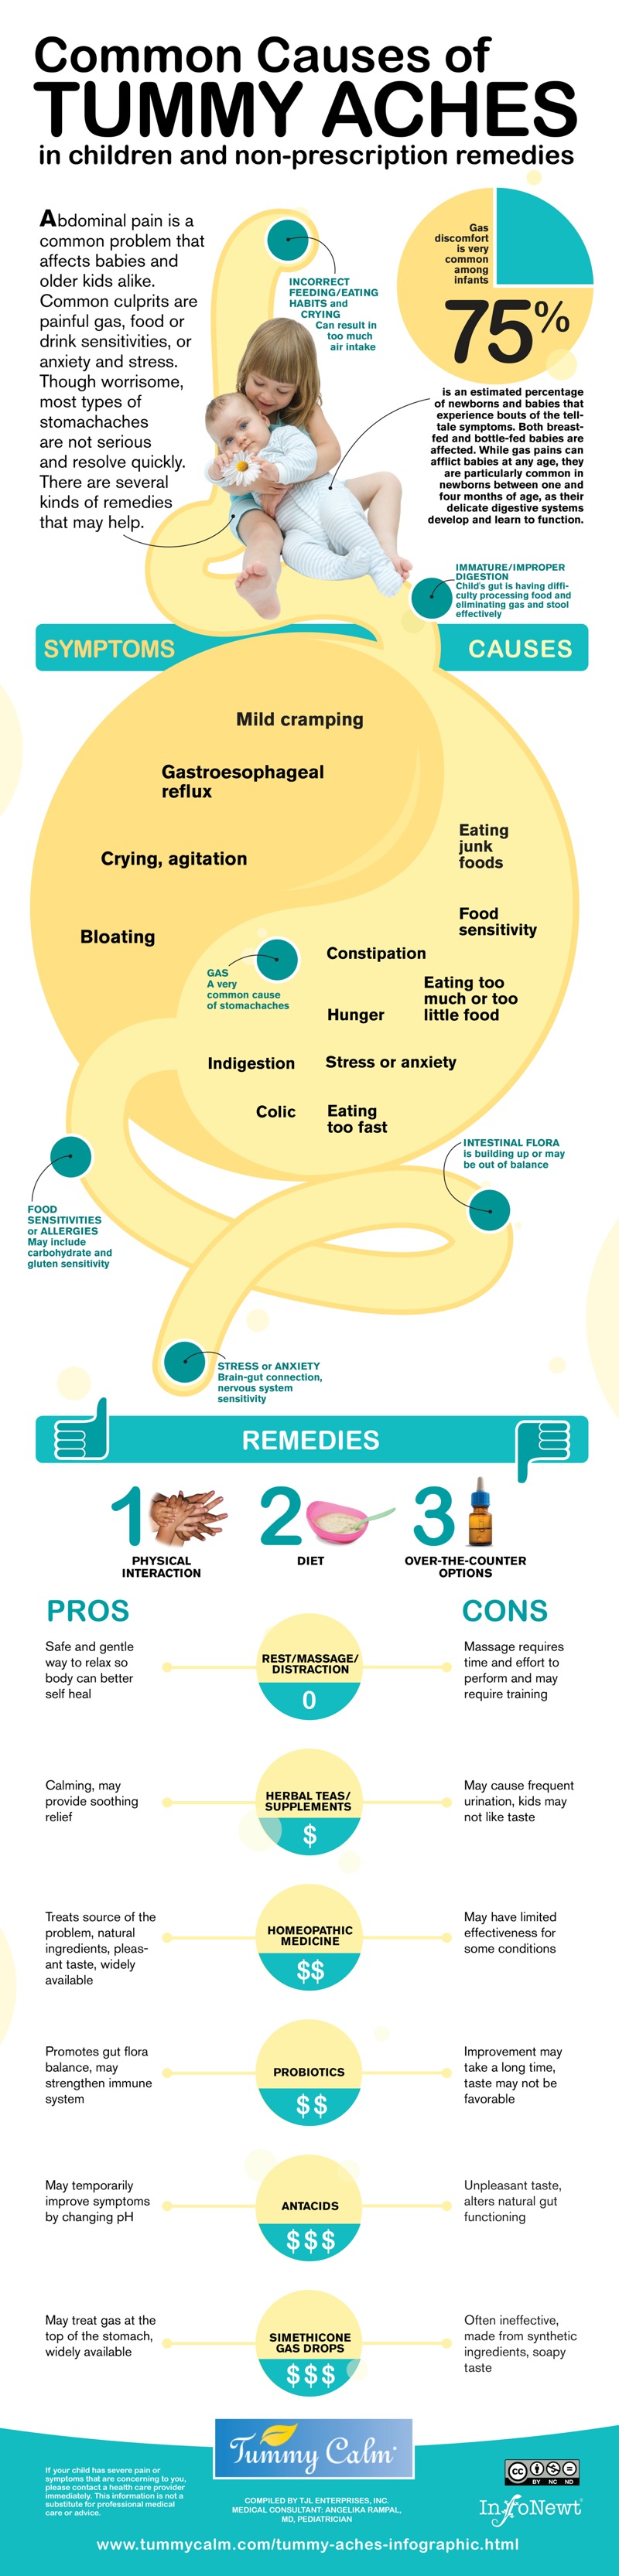 Common Causes of Tummy Aches in Children infographic